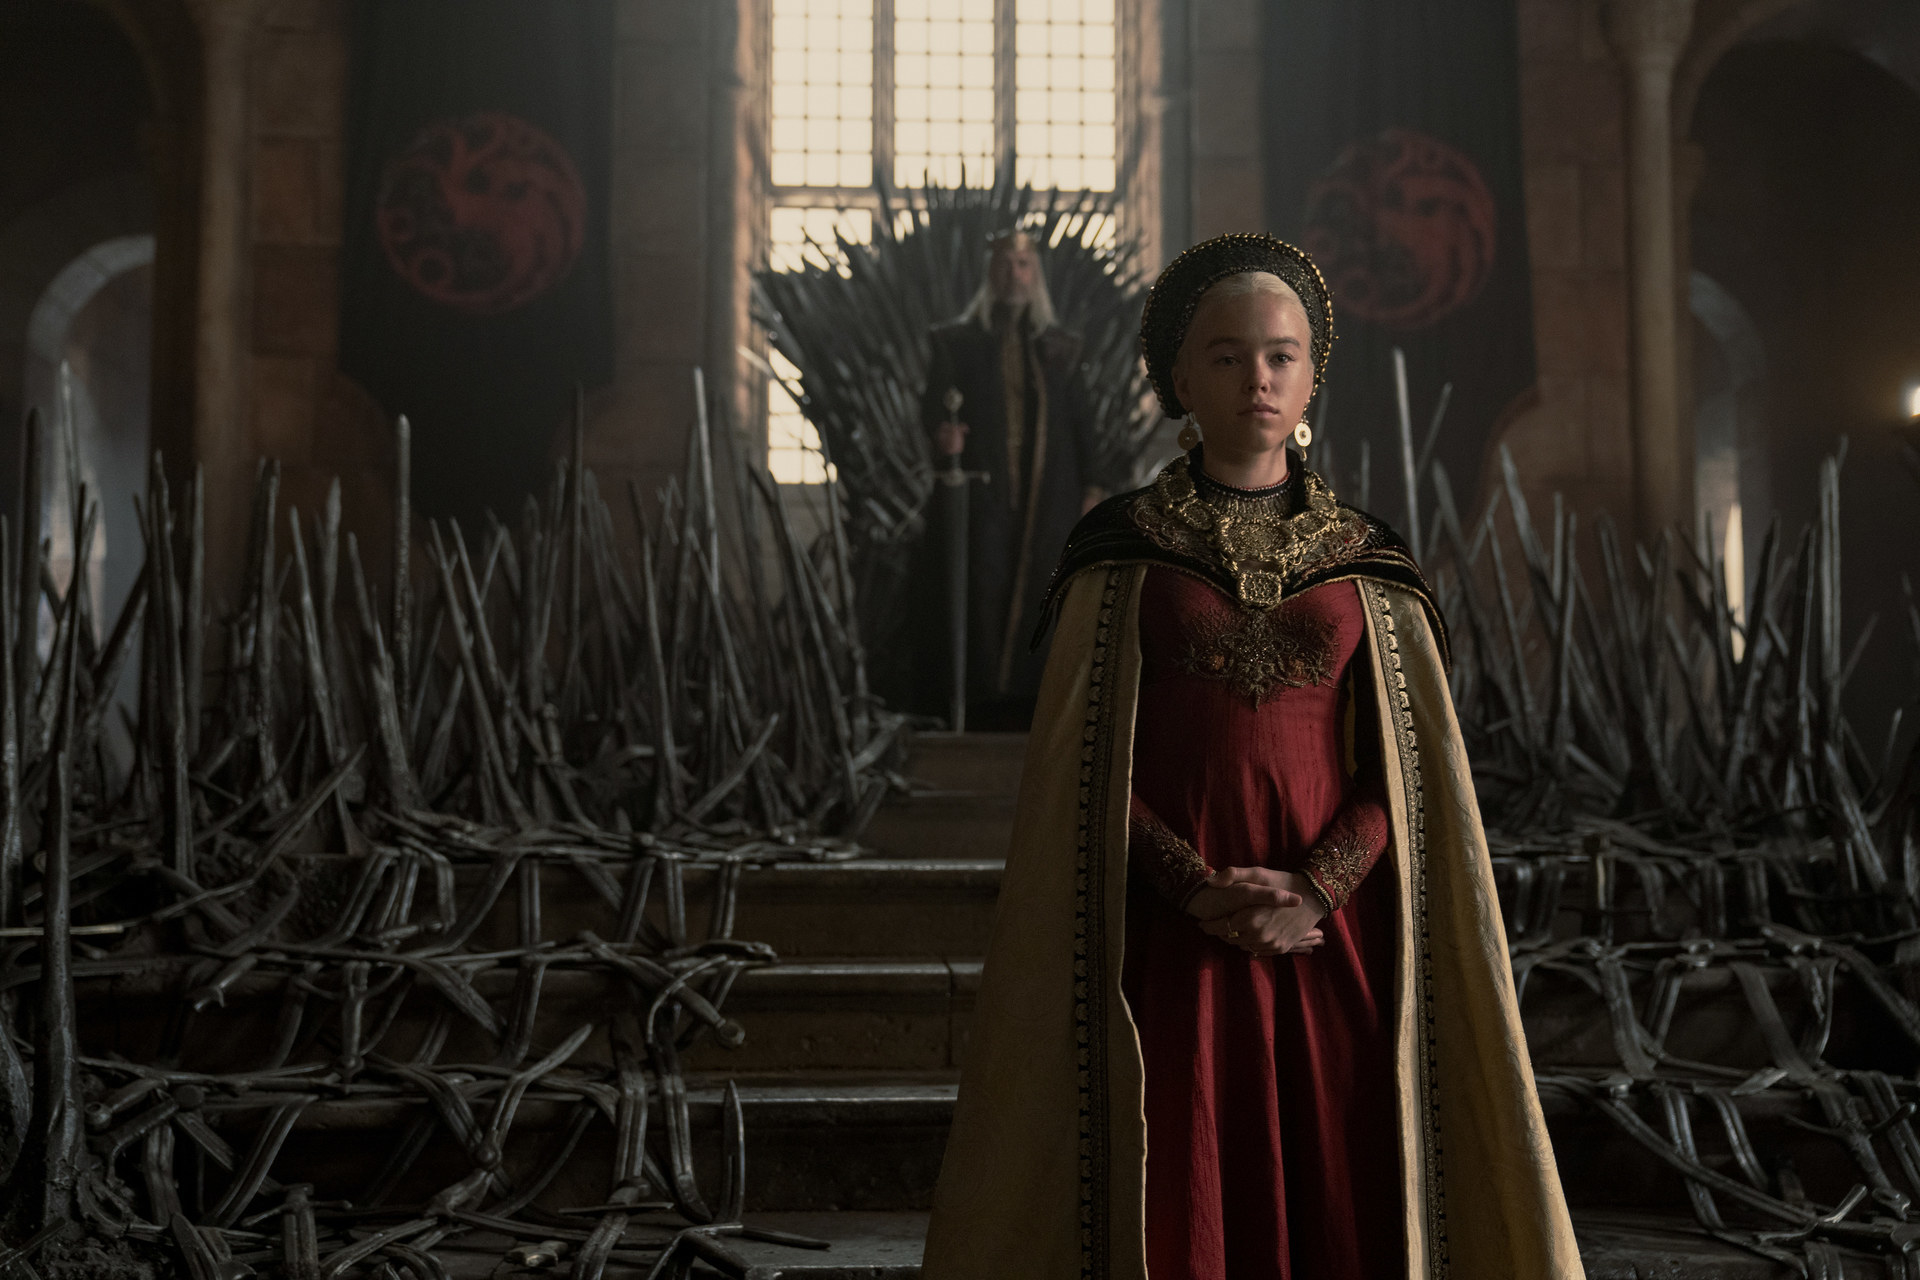 Rhaanyra standing in front of the throne on which Viserys sits